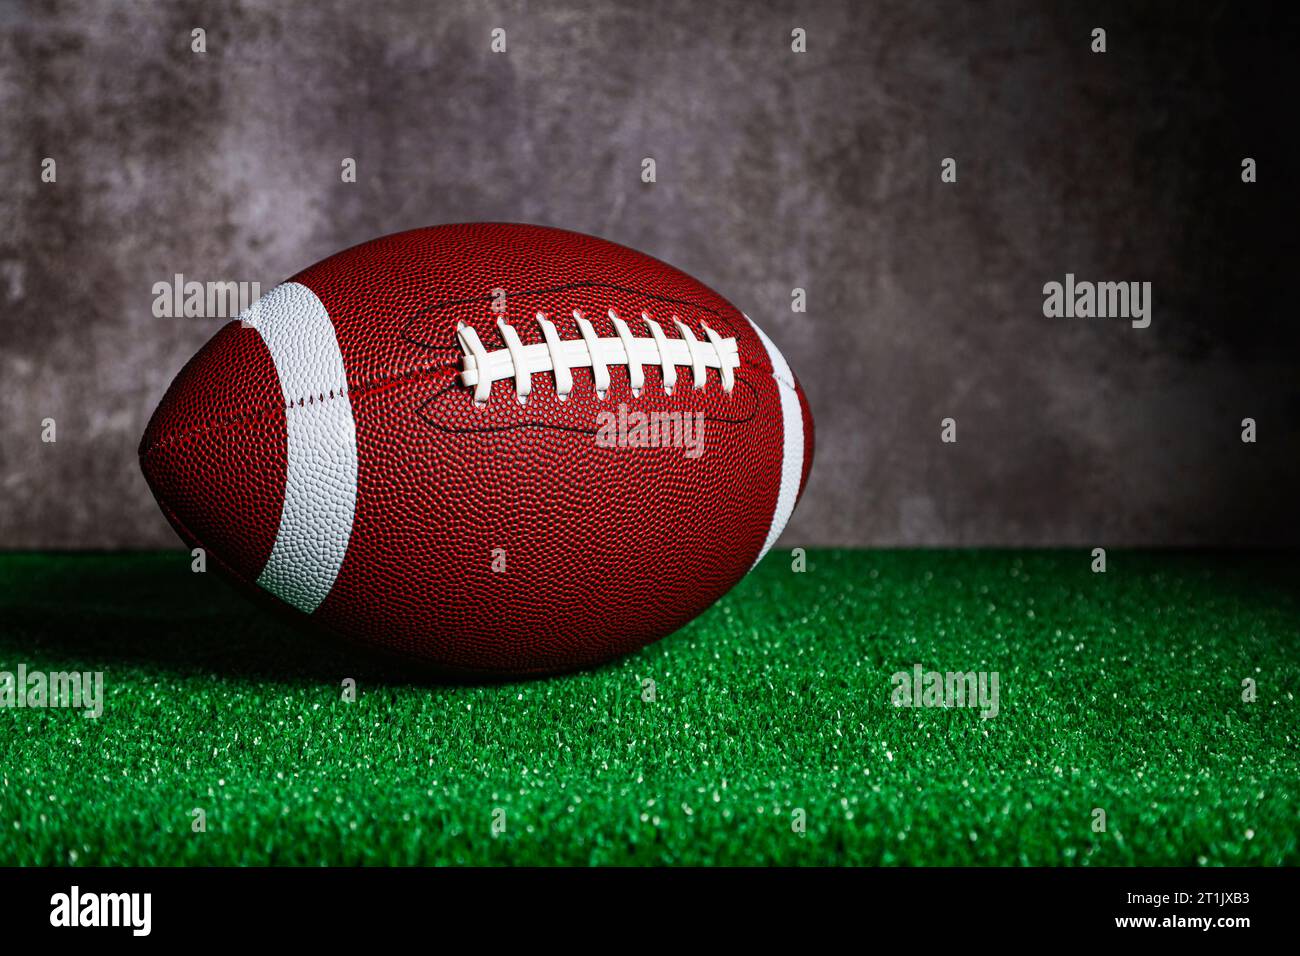 An american football ball over a ground with green grass in front of a concrete wall. Stock Photo